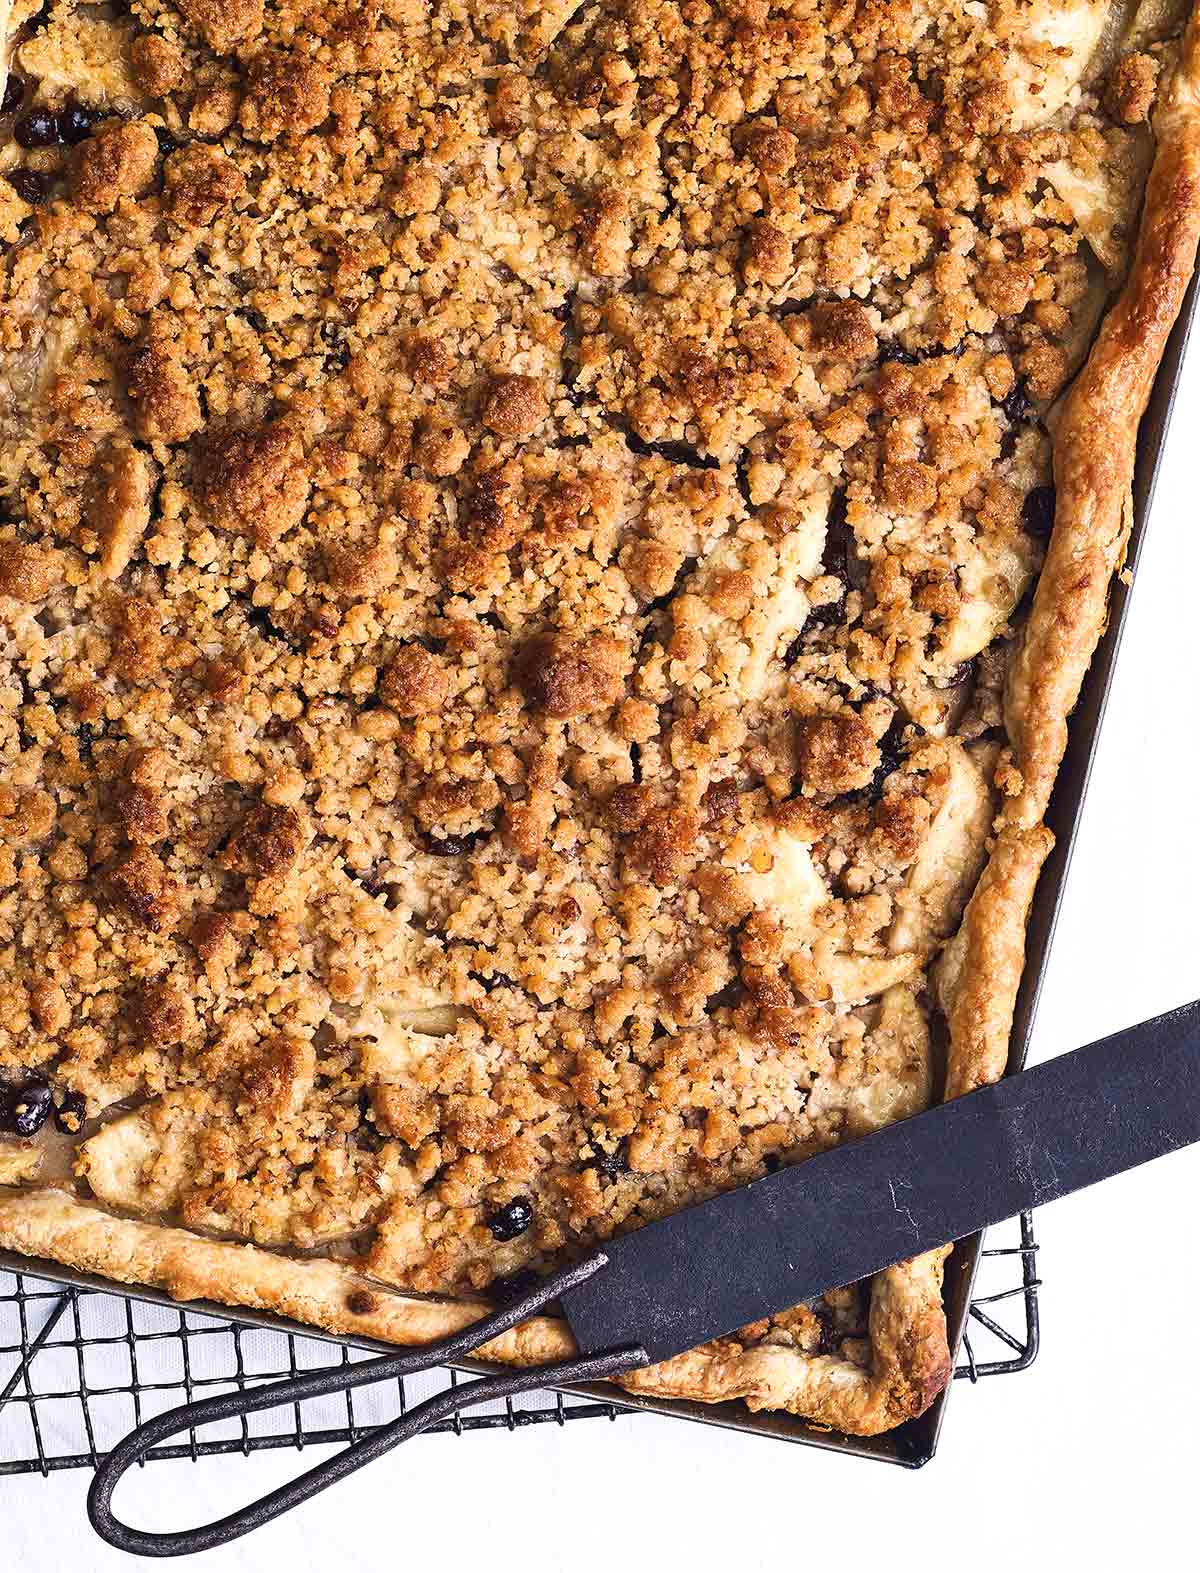 Caramel apple slab pie in a large metal sheet pan, on a wire rack with a pie knife.